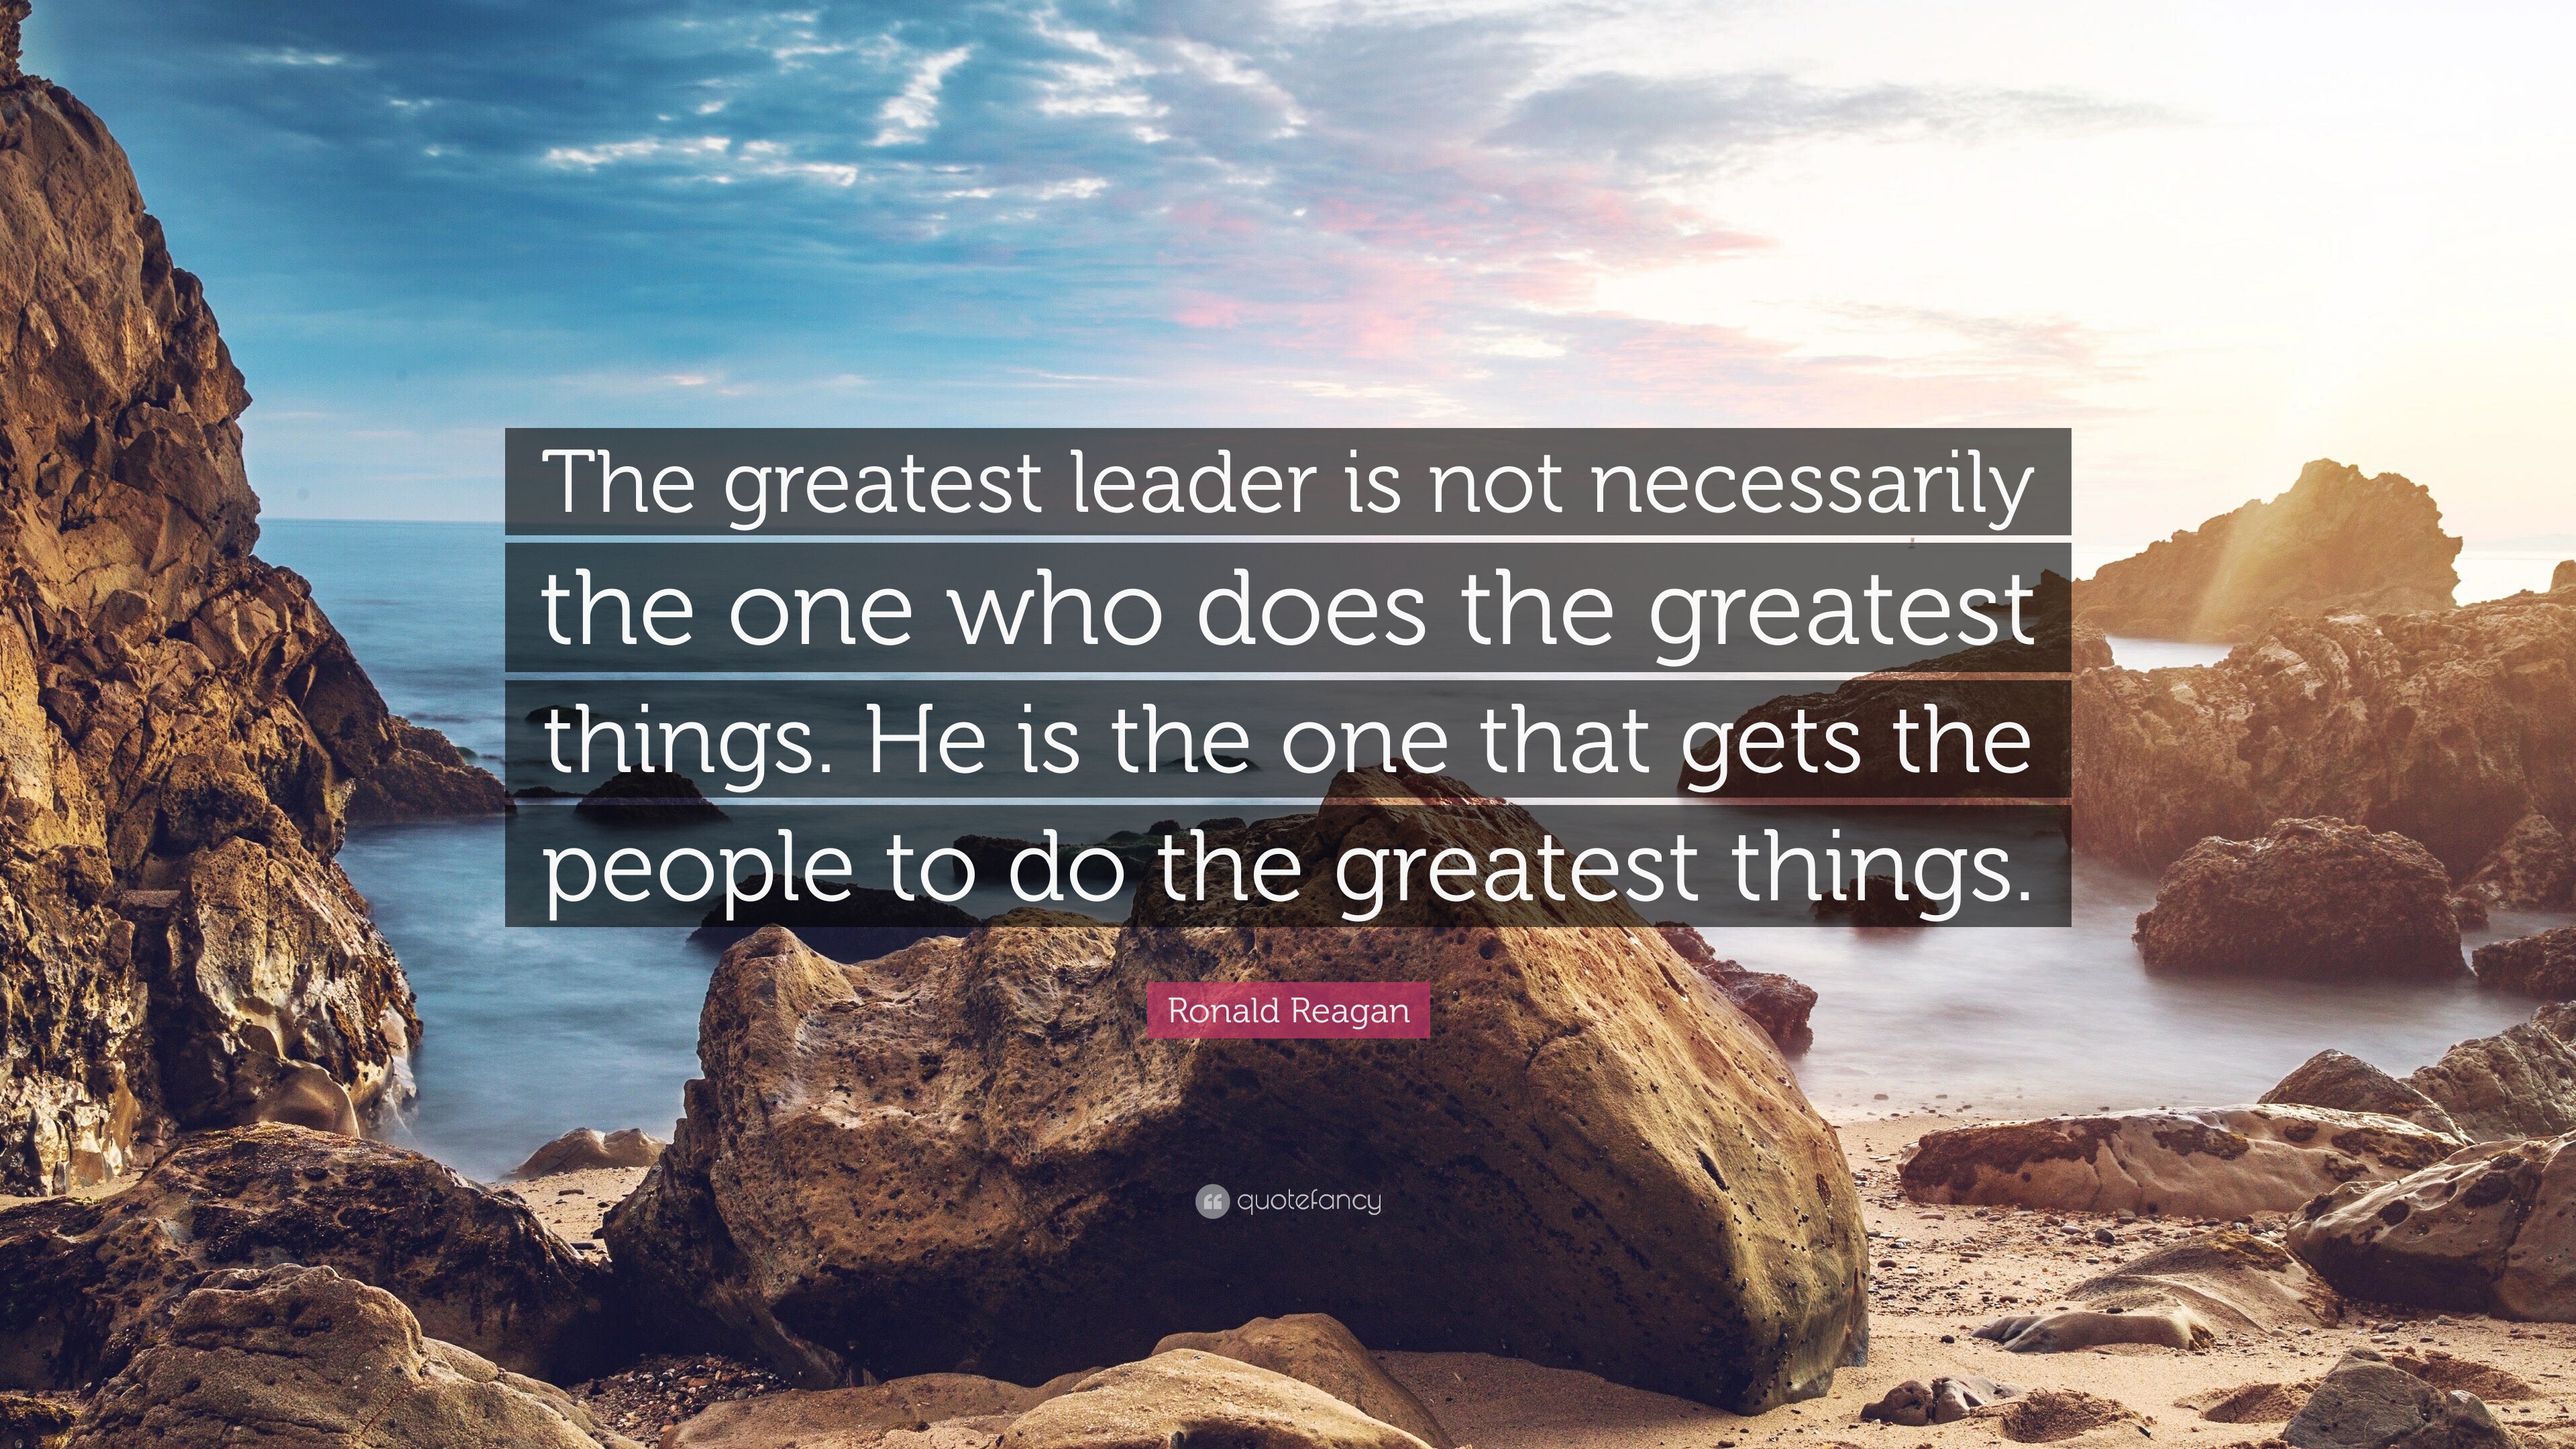 Ronald Reagan Quote: “The greatest leader is not necessarily the one